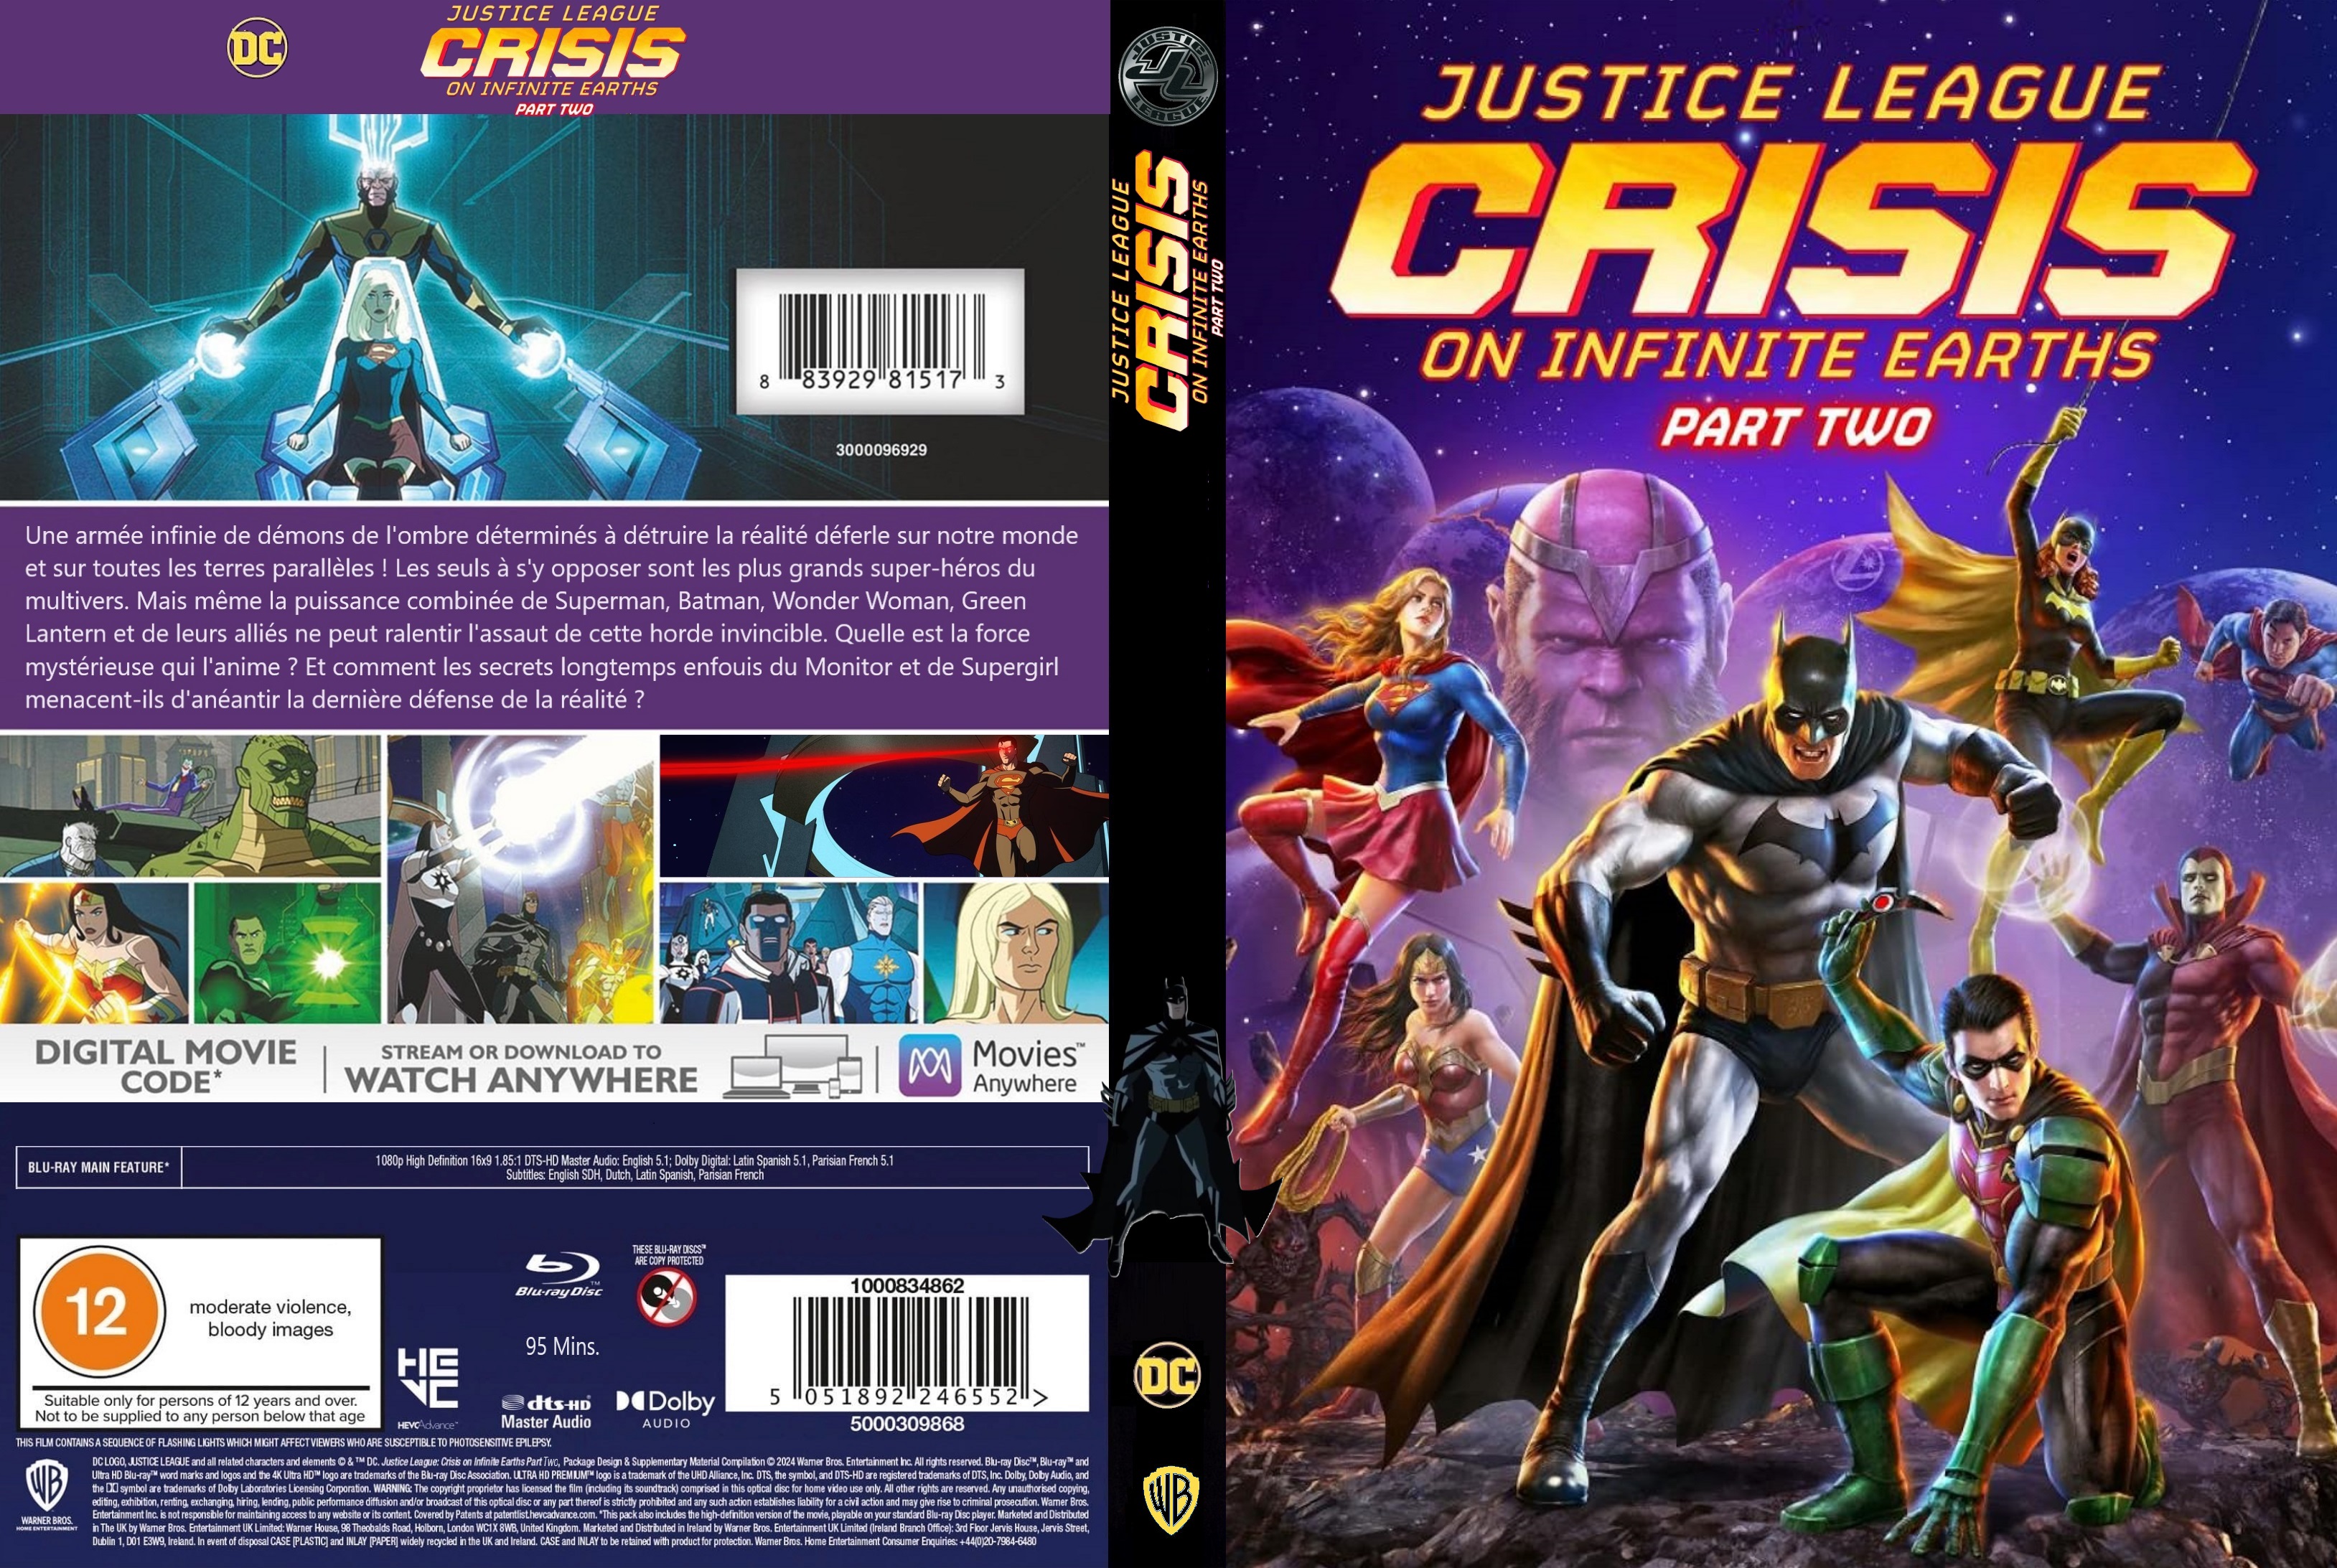 Jaquette DVD Justice League Crisis on infinite Earths part two custom